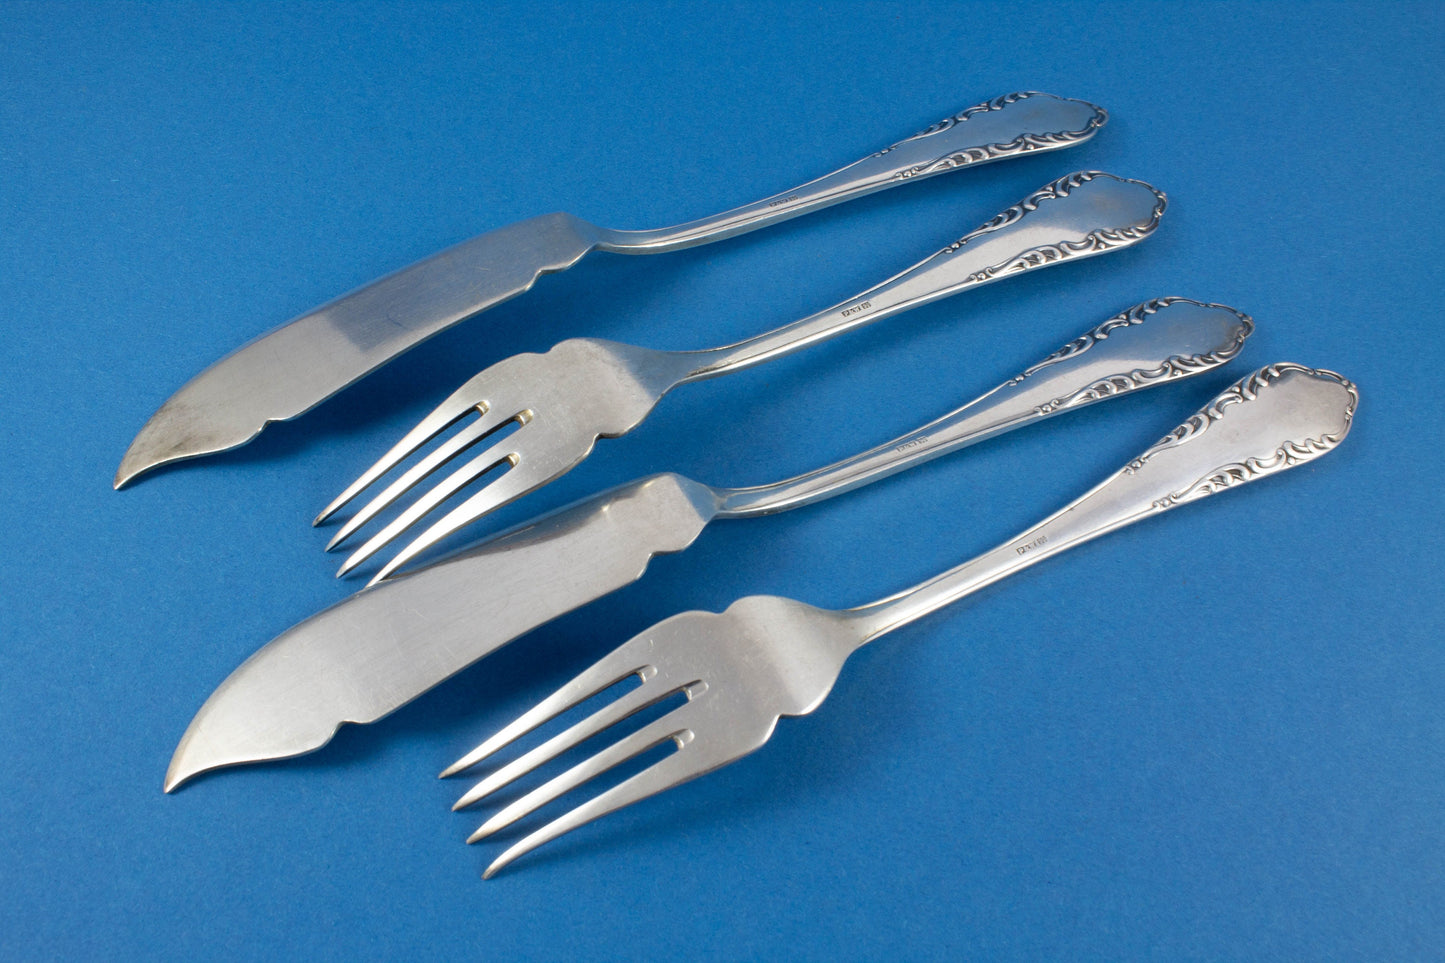 Fish cutlery for 2 people, candle light dinner, 2 fish forks, 2 fish knives